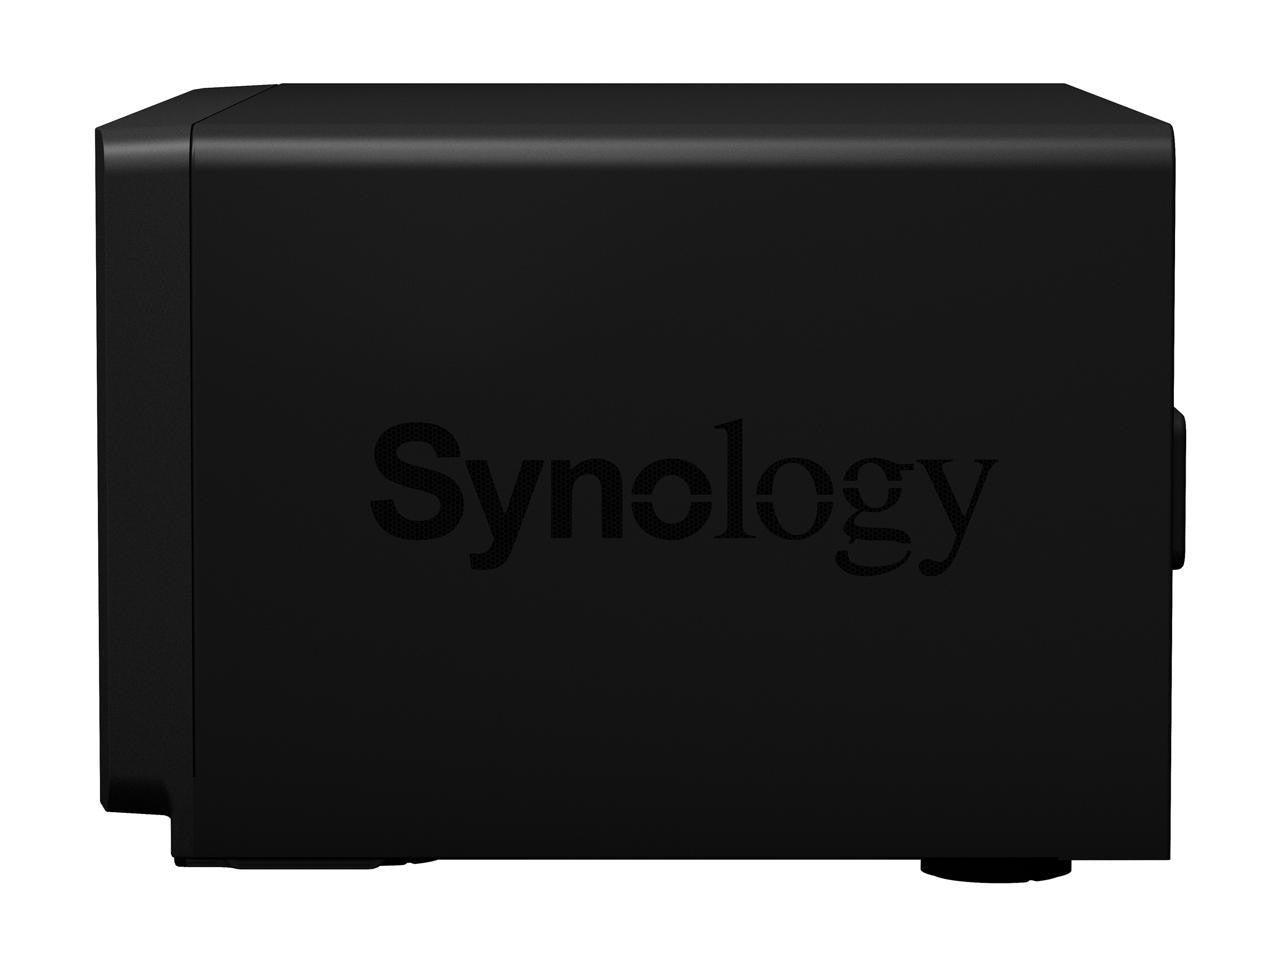 Synology DS1821+ 8-BAY DiskStation with 16GB Synology RAM and 64TB (8x8TB) Western Digital RED PLUS Drives Fully Assembled and Tested